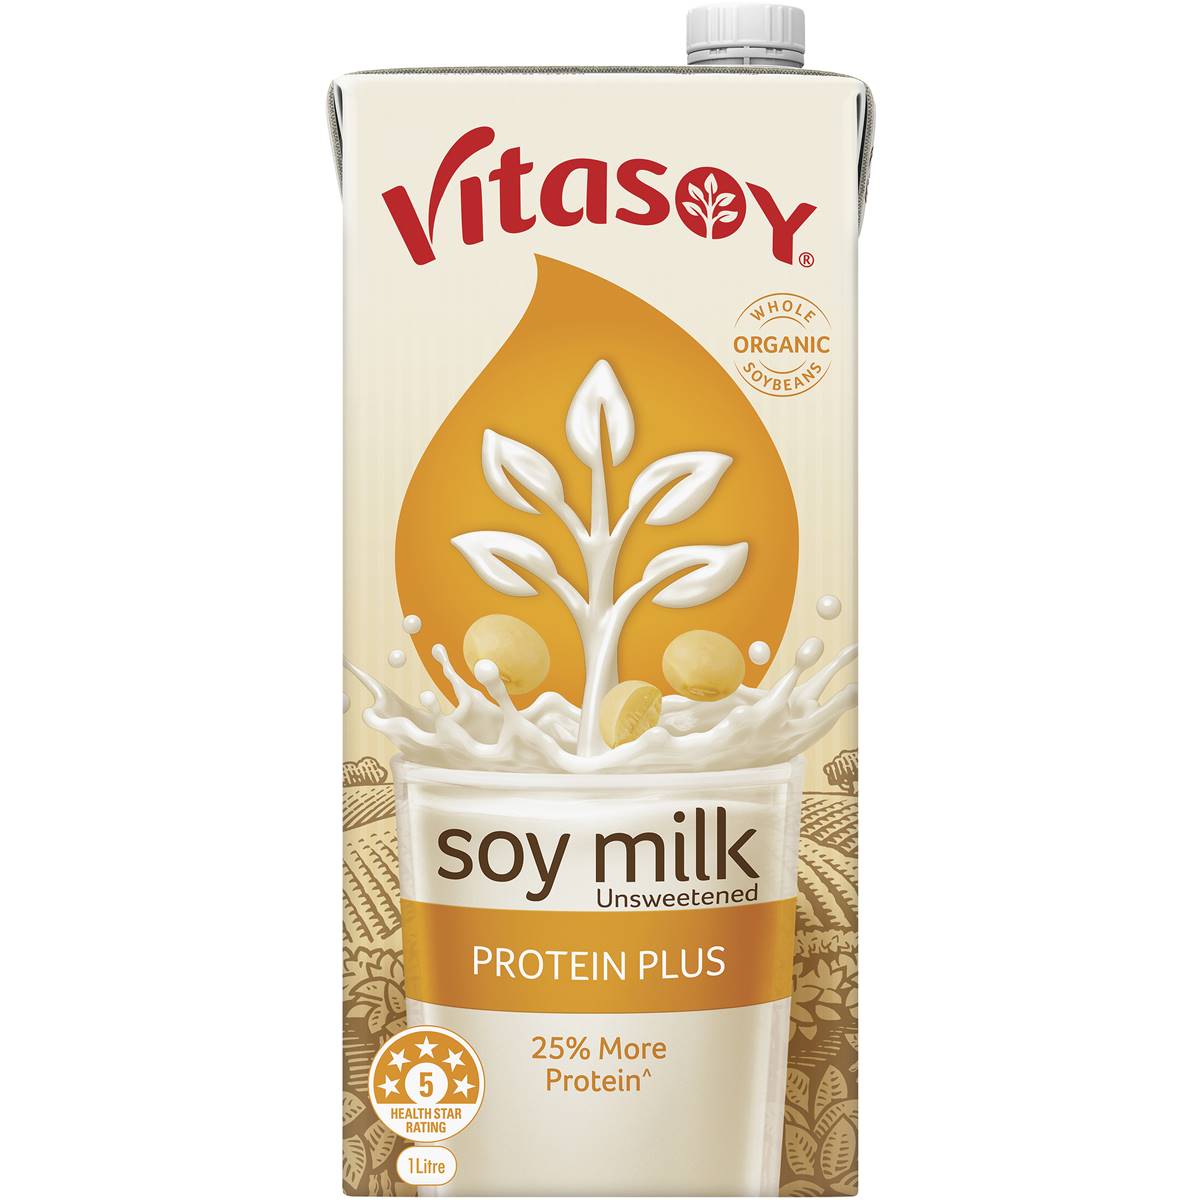 Calories in Vitasoy Protein Plus Unsweetened Soy Milk